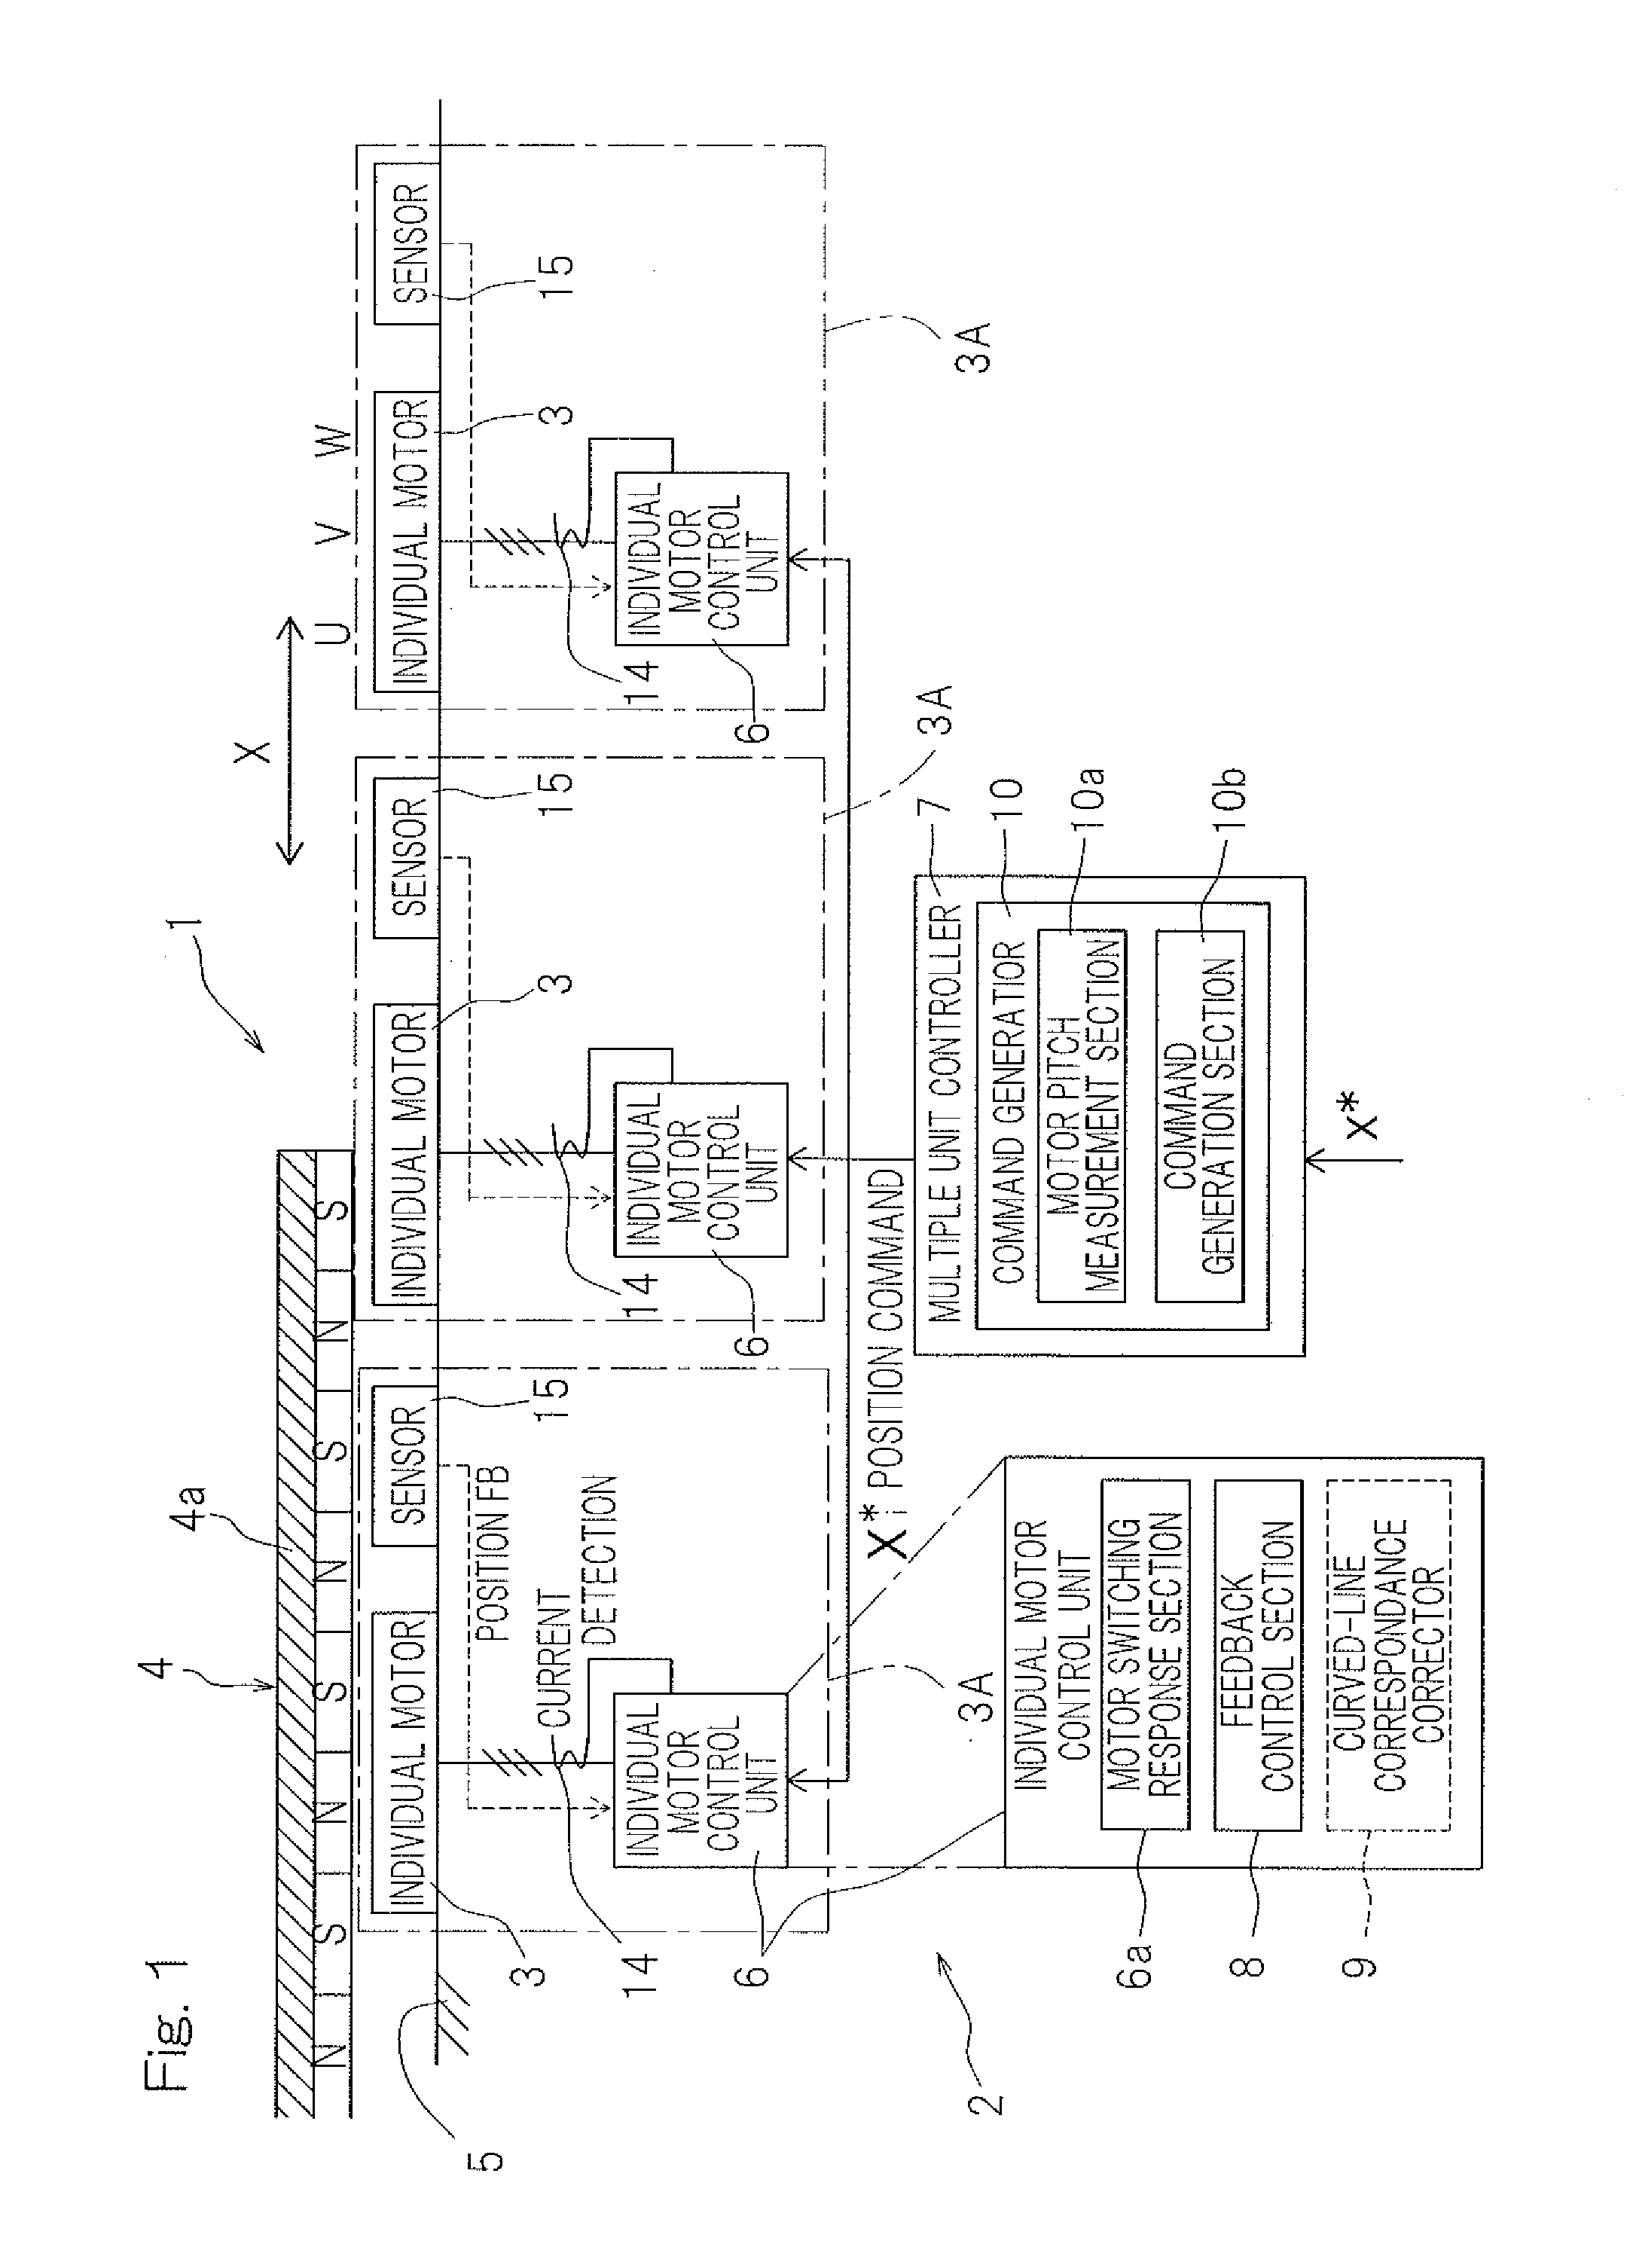 Discontinuous linear motor system